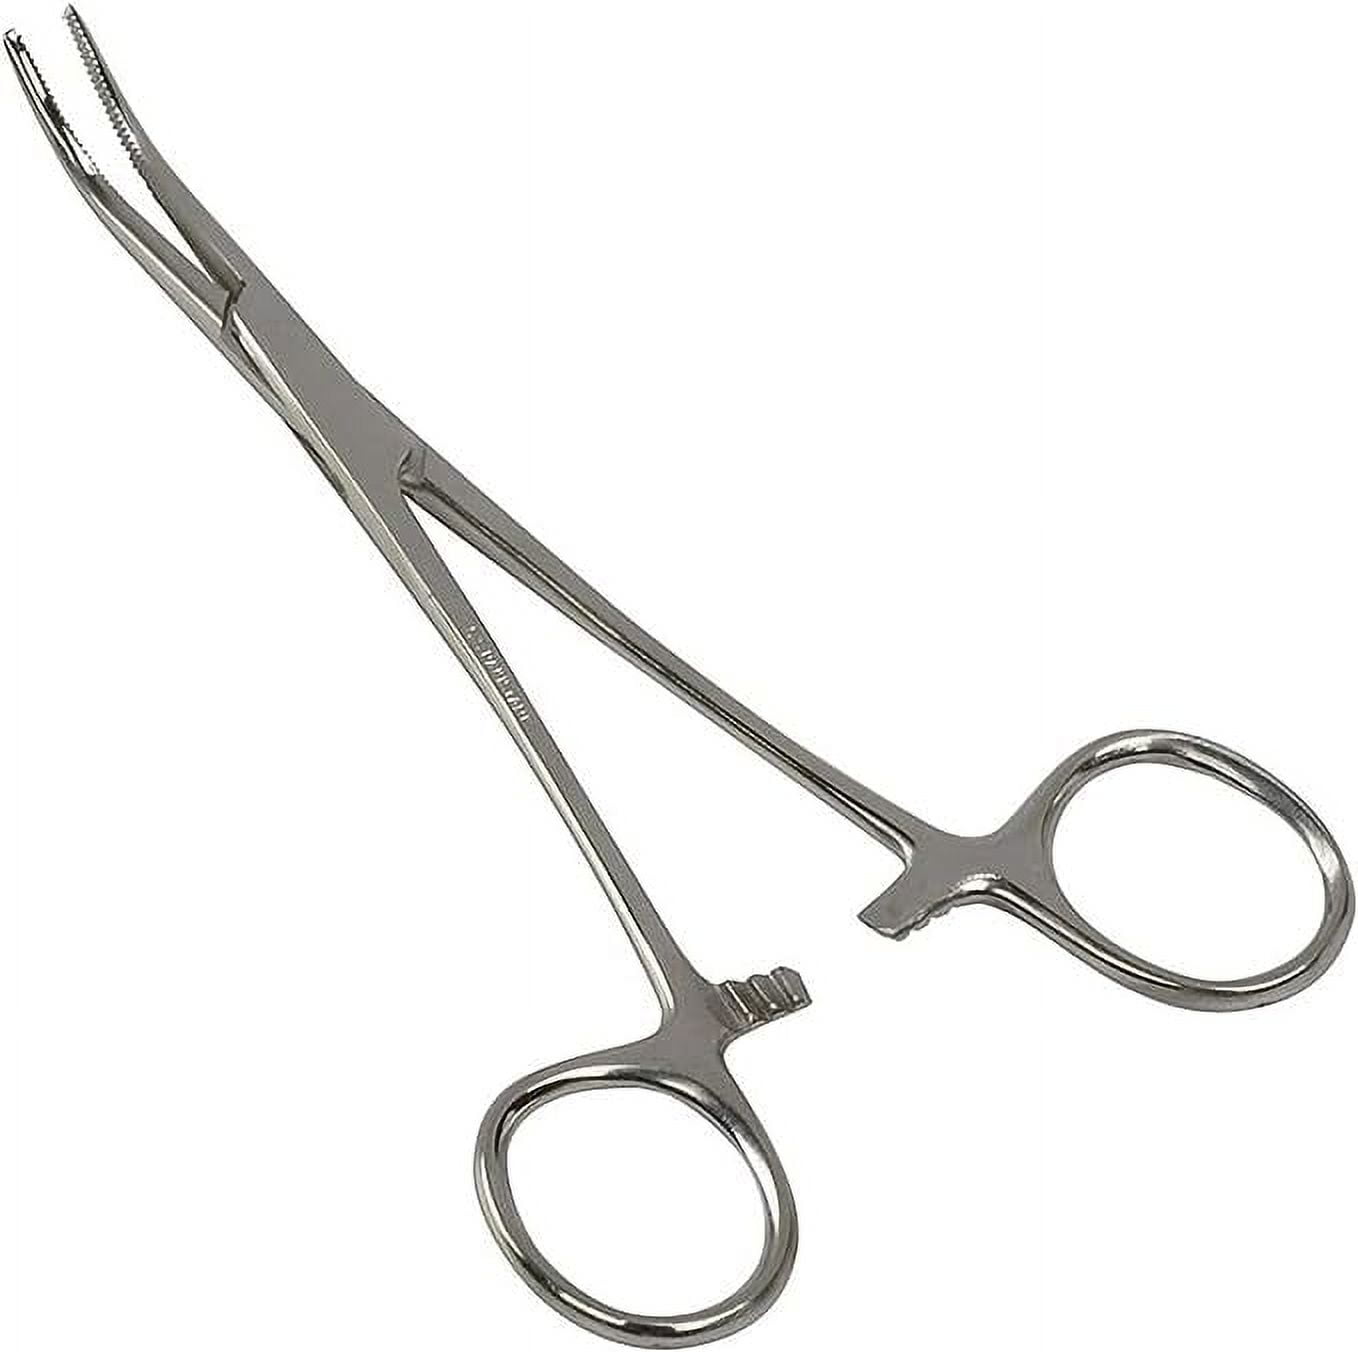 Fishing 18 Curved Hemostat Forceps Locking Clamps - Stainless Steel